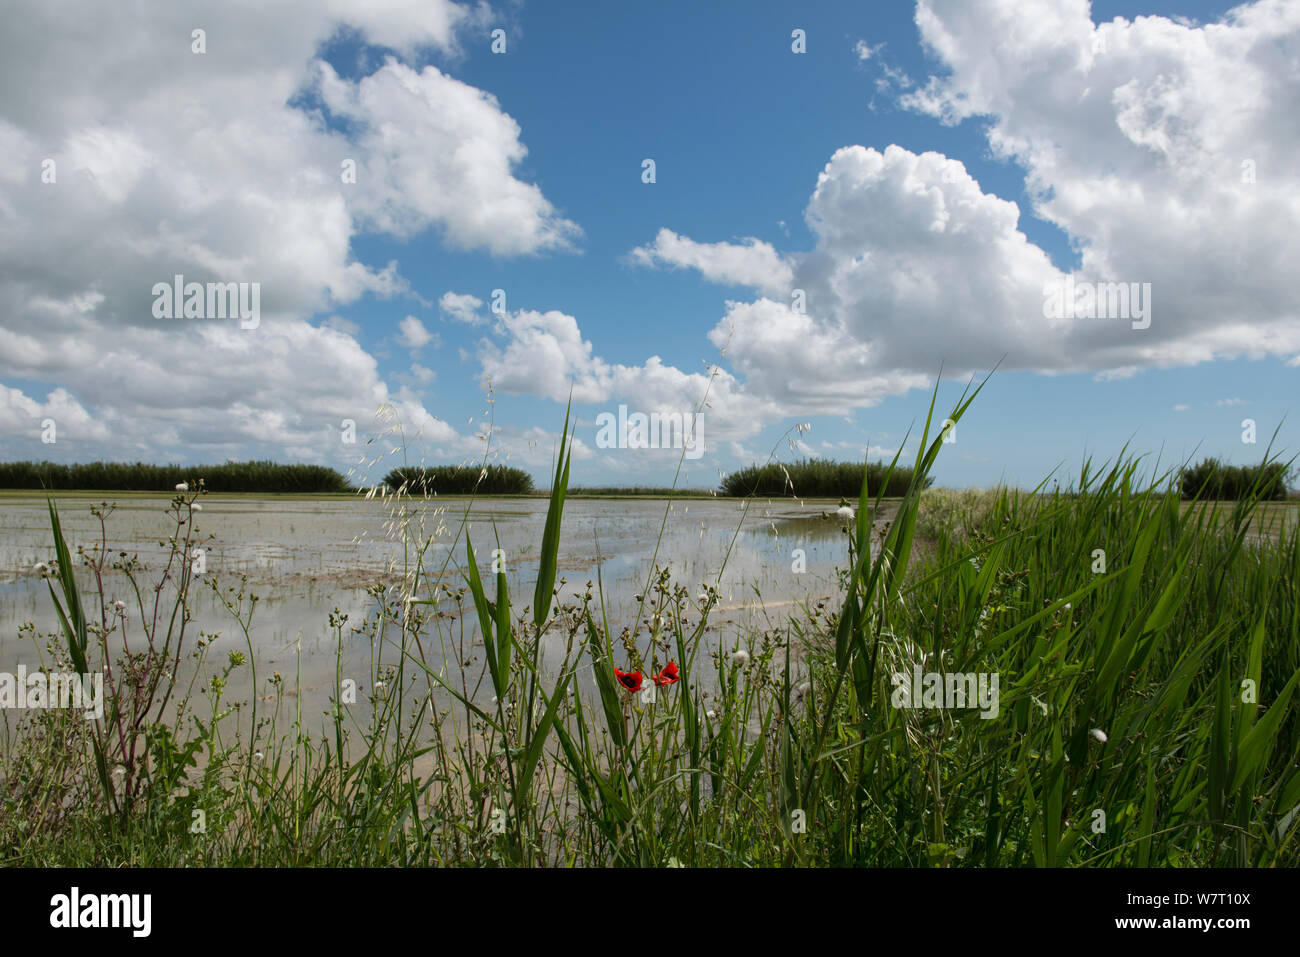 Wild flowers at the edge of a rice field including Poppies (Papaver rhoeas) and Groundsel (Senecio vulgaris) Camargue, France, May. Stock Photo